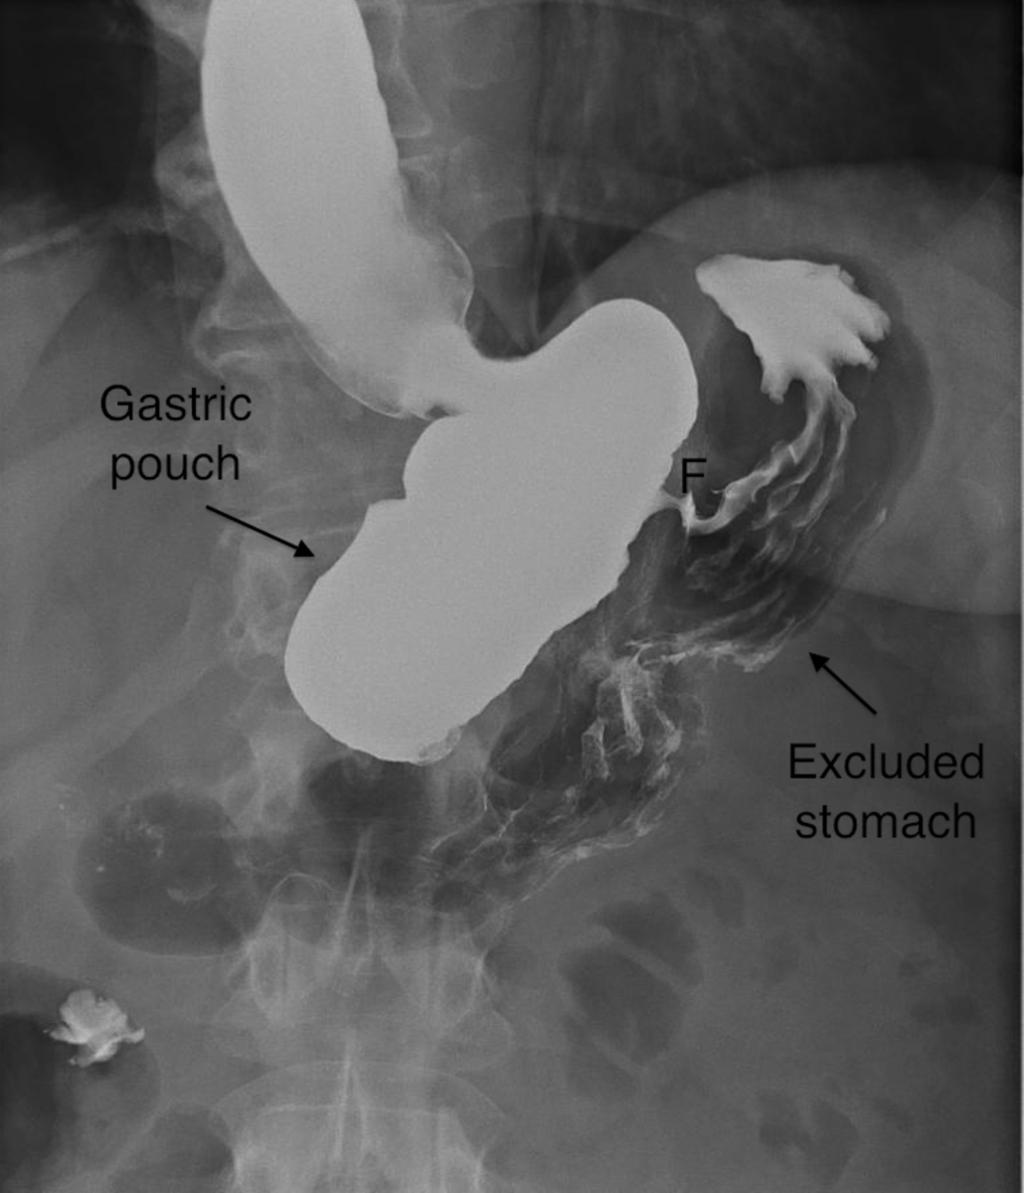 Fig. 32: Disruption of the suture line superiorly with a fistula (F) forming between the gastric pouch and the excluded gastric